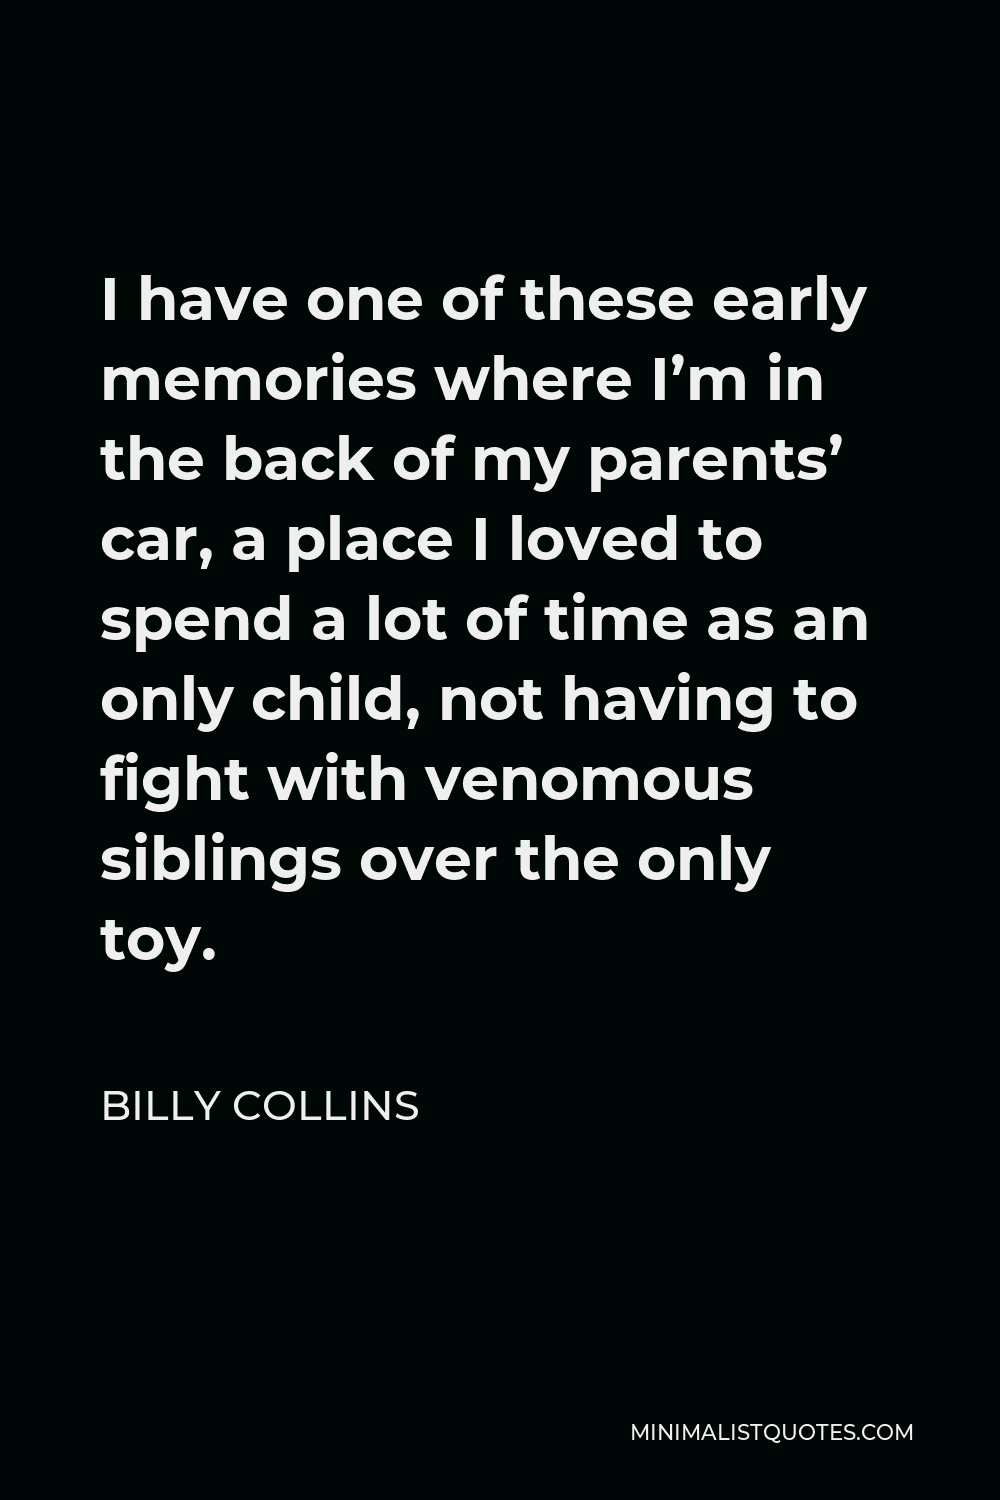 Billy Collins Quote - I have one of these early memories where I’m in the back of my parents’ car, a place I loved to spend a lot of time as an only child, not having to fight with venomous siblings over the only toy.